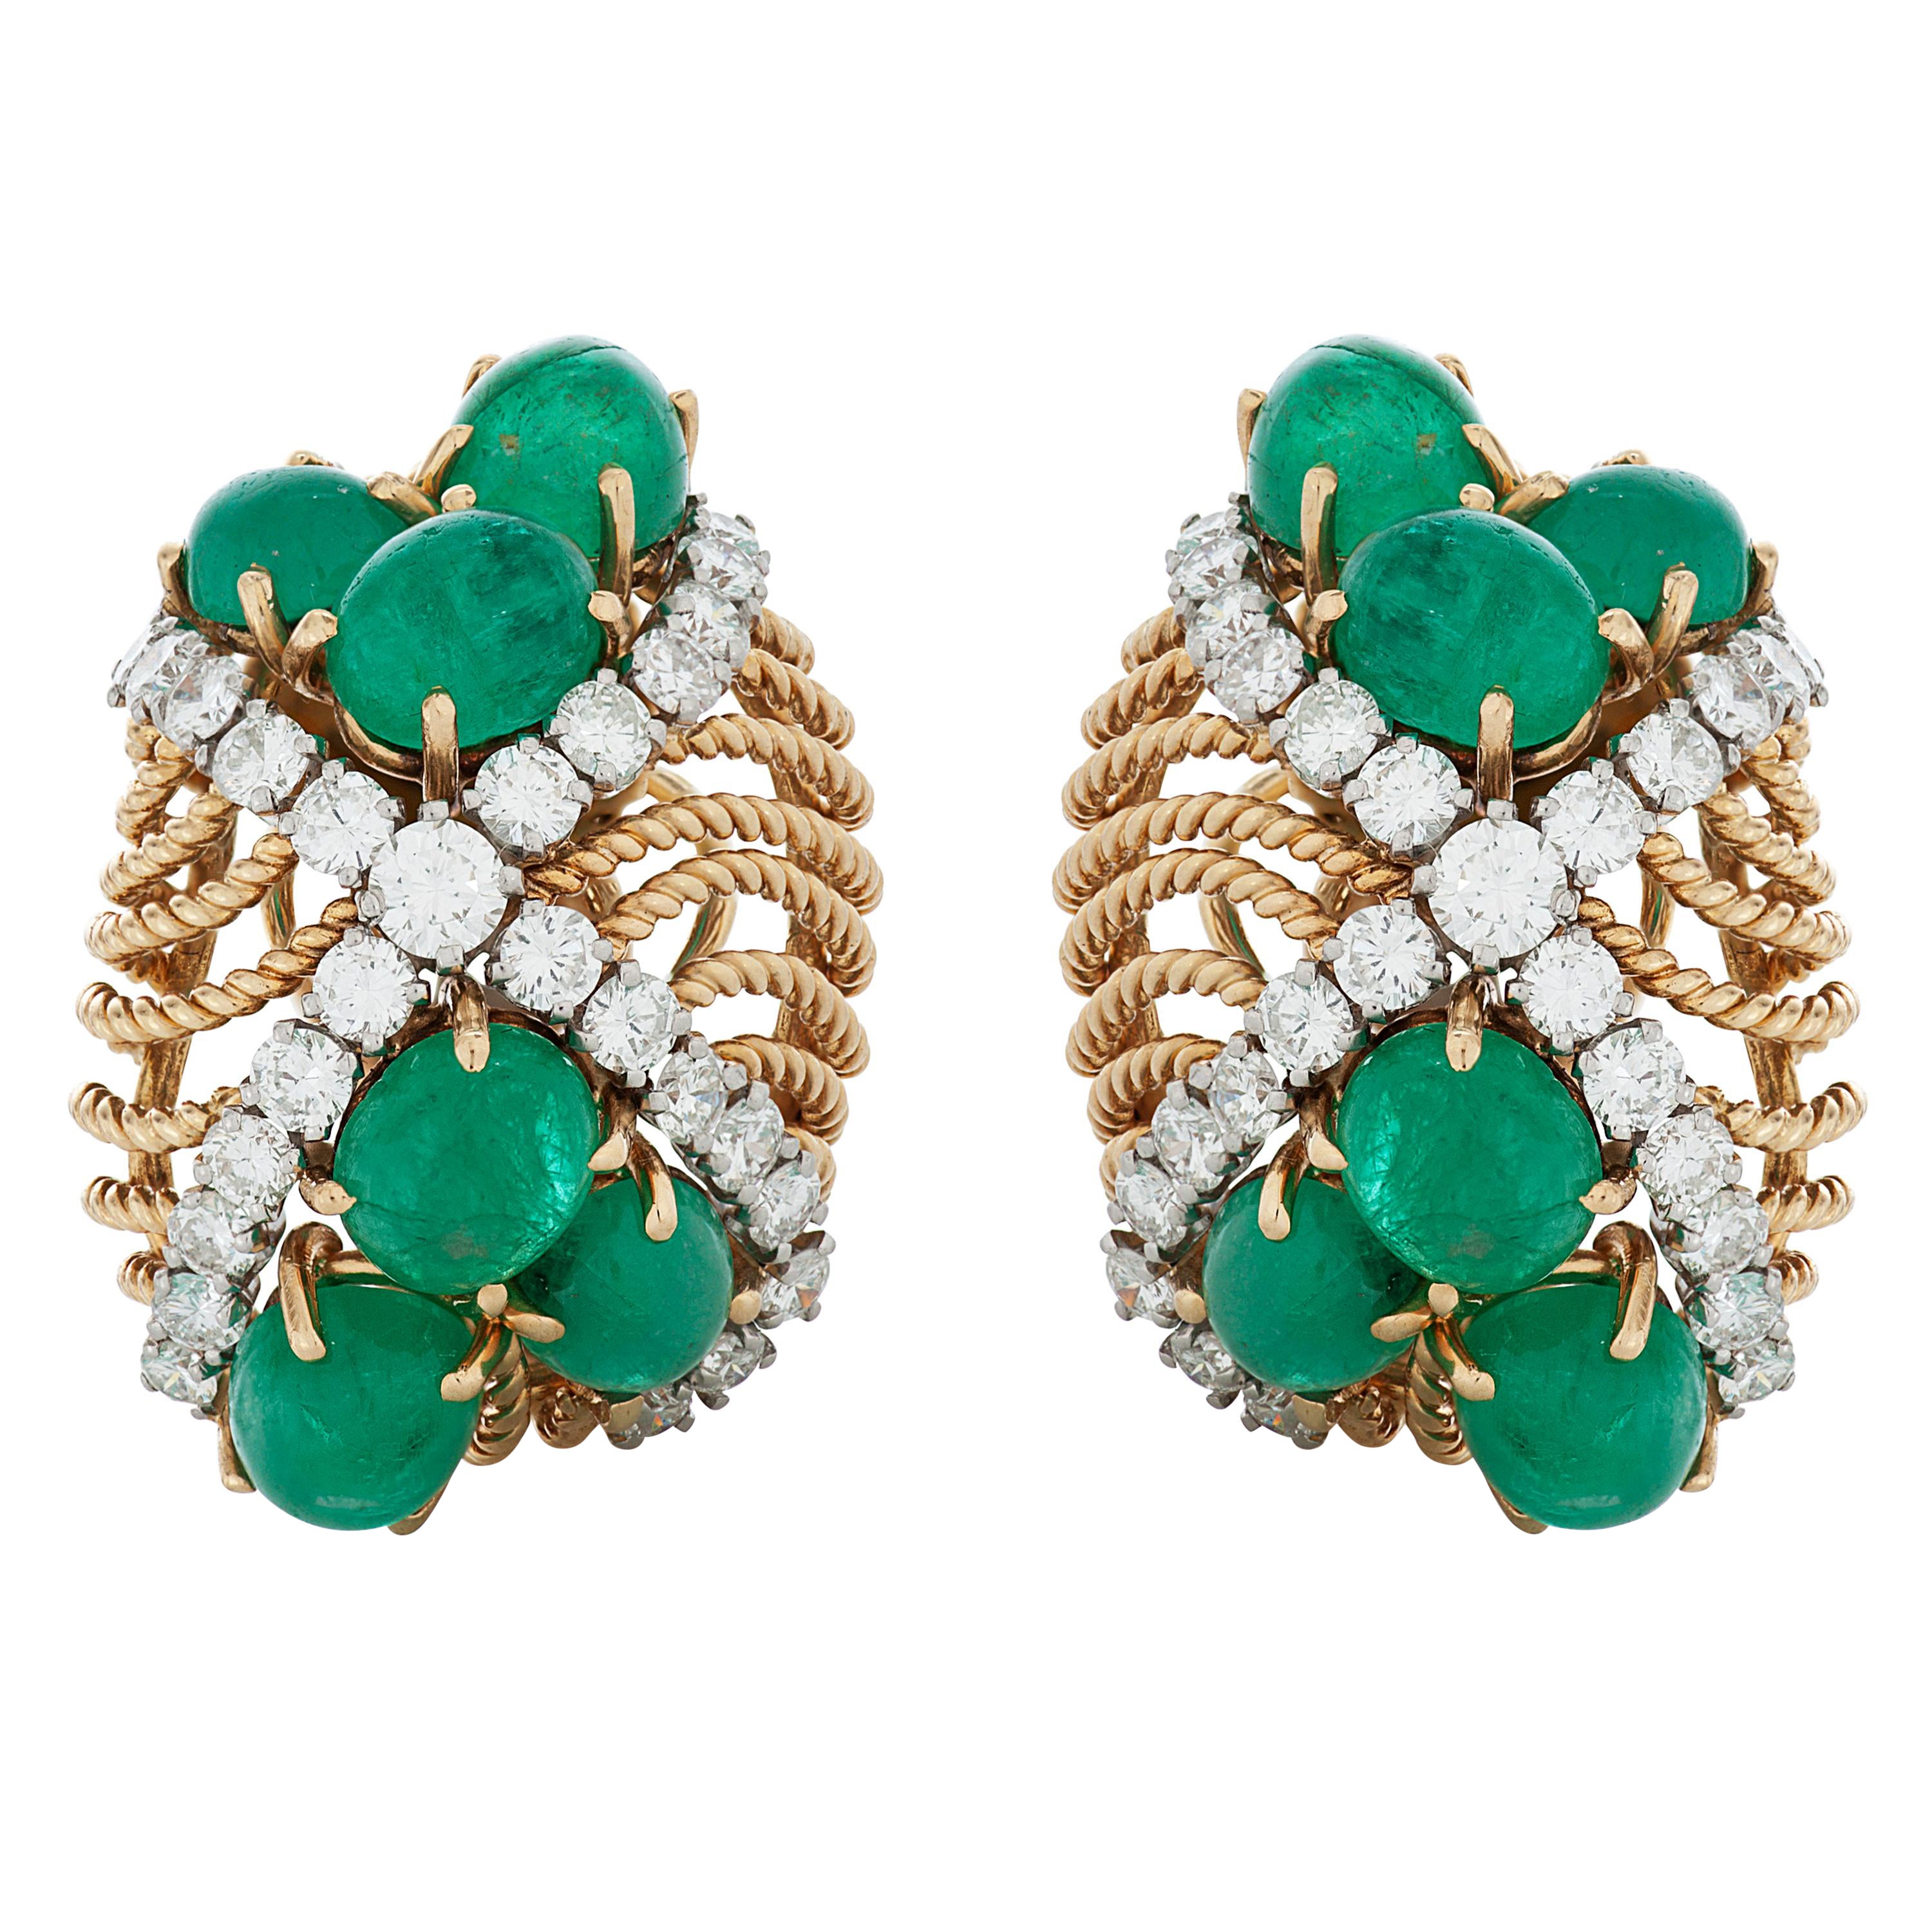 Vintage Seaman Schepps Cabochon Emerald and Diamond Earrings in 18k Yellow Gold